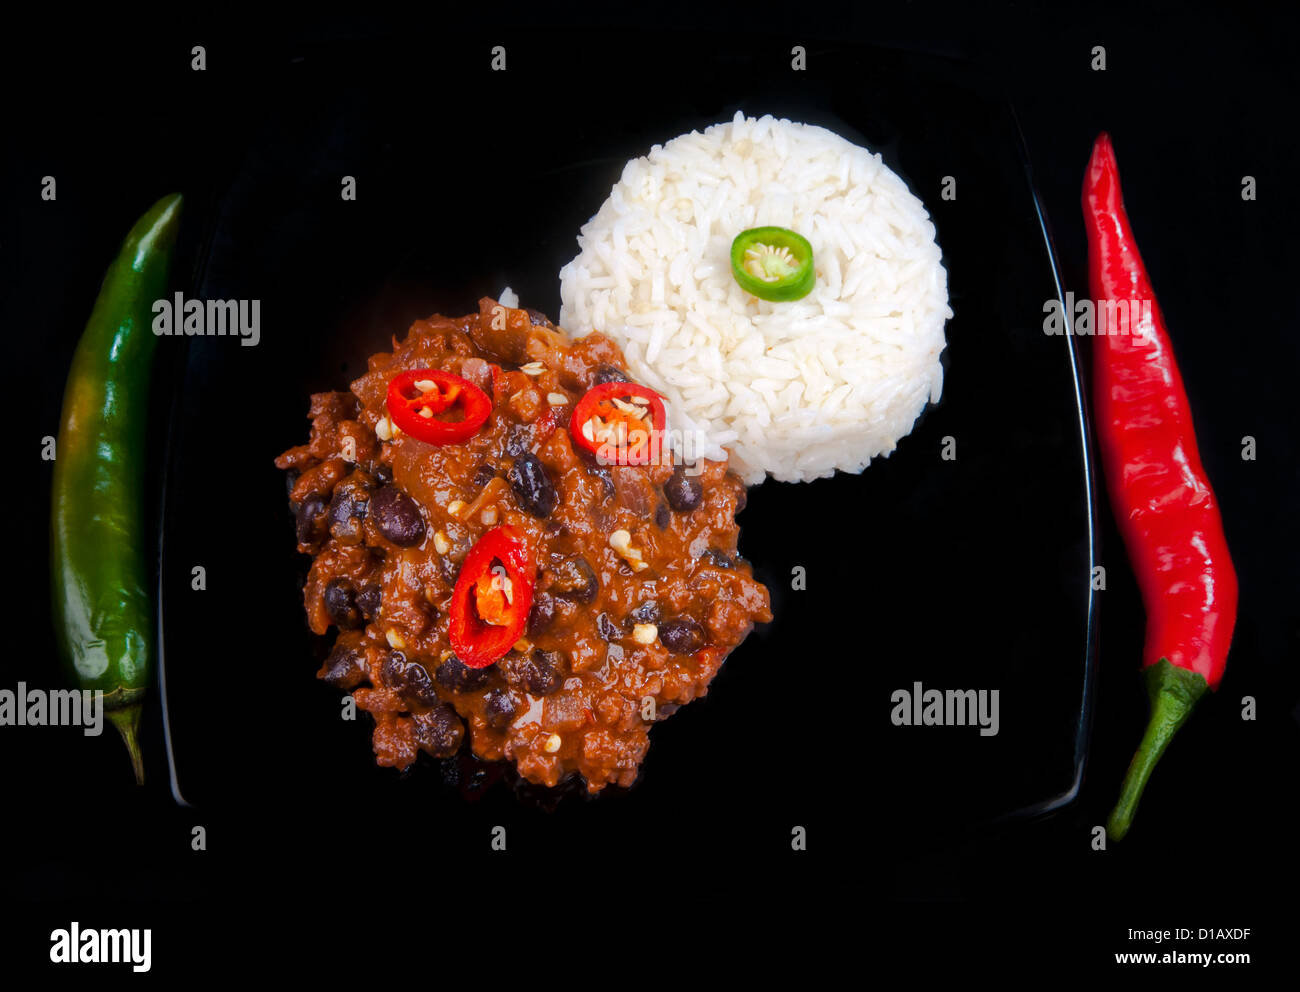 Hot and spicy Chili con Carne with red and green peppers instead of a knife and fork and rice. On a black plate on black. Stock Photo